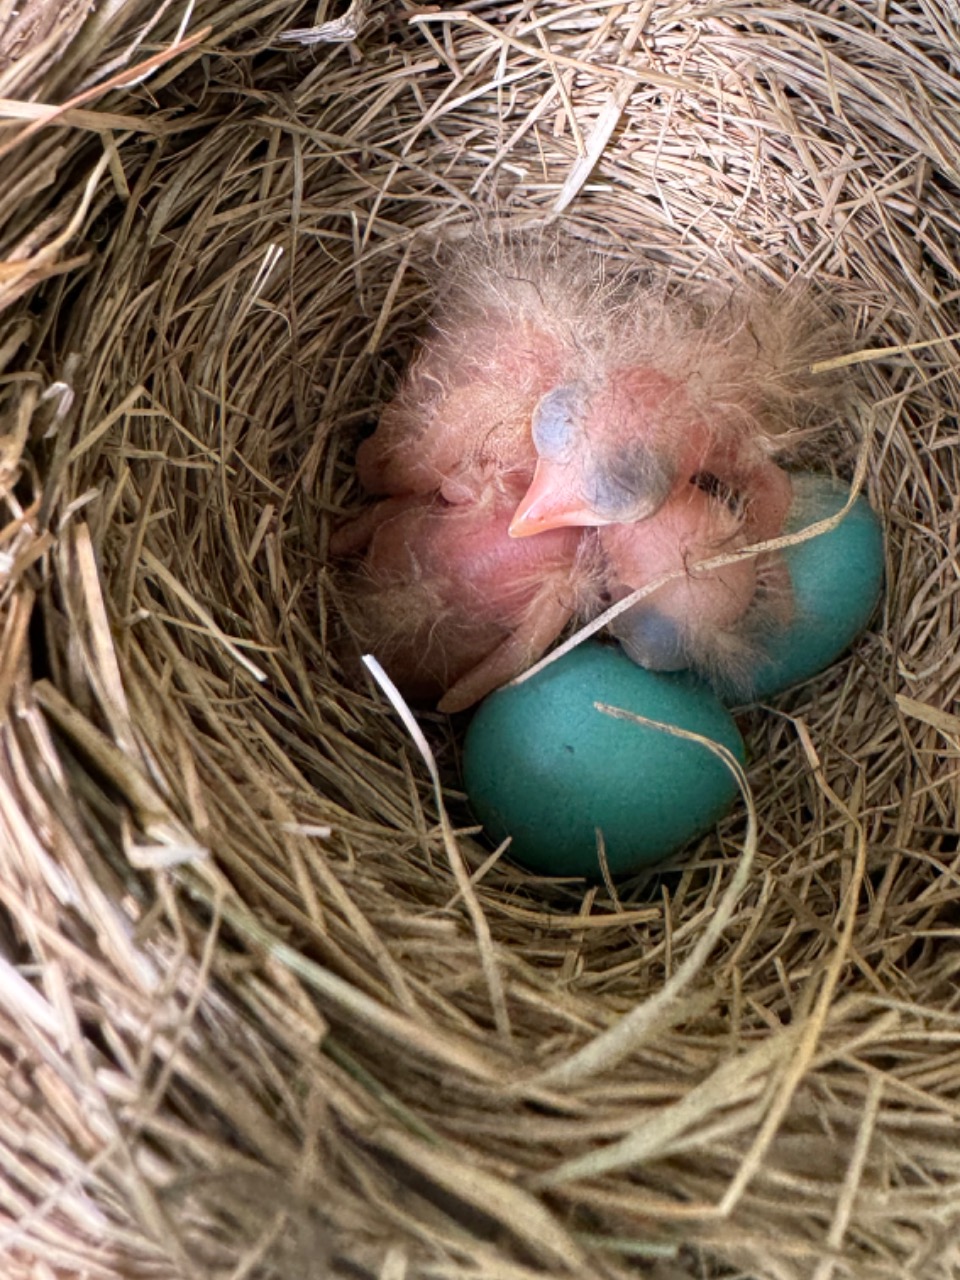 Just hatched baby robins in a brown nest with blue eggs